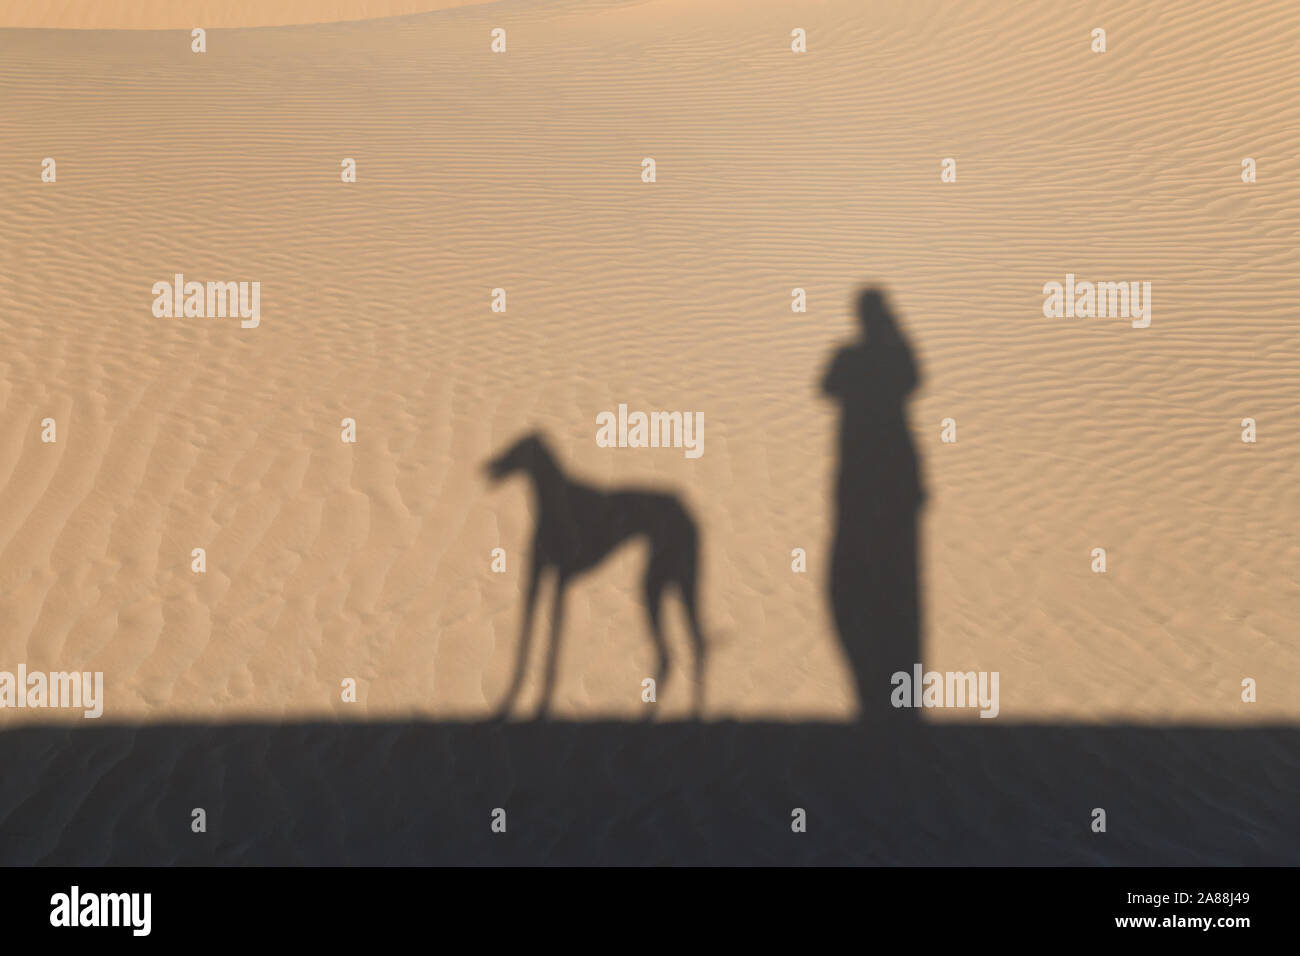 Shadow of a person with a Sloughi dog (Arabian greyhound) against sand dunes in the Sahara desert of Morocco. Stock Photo